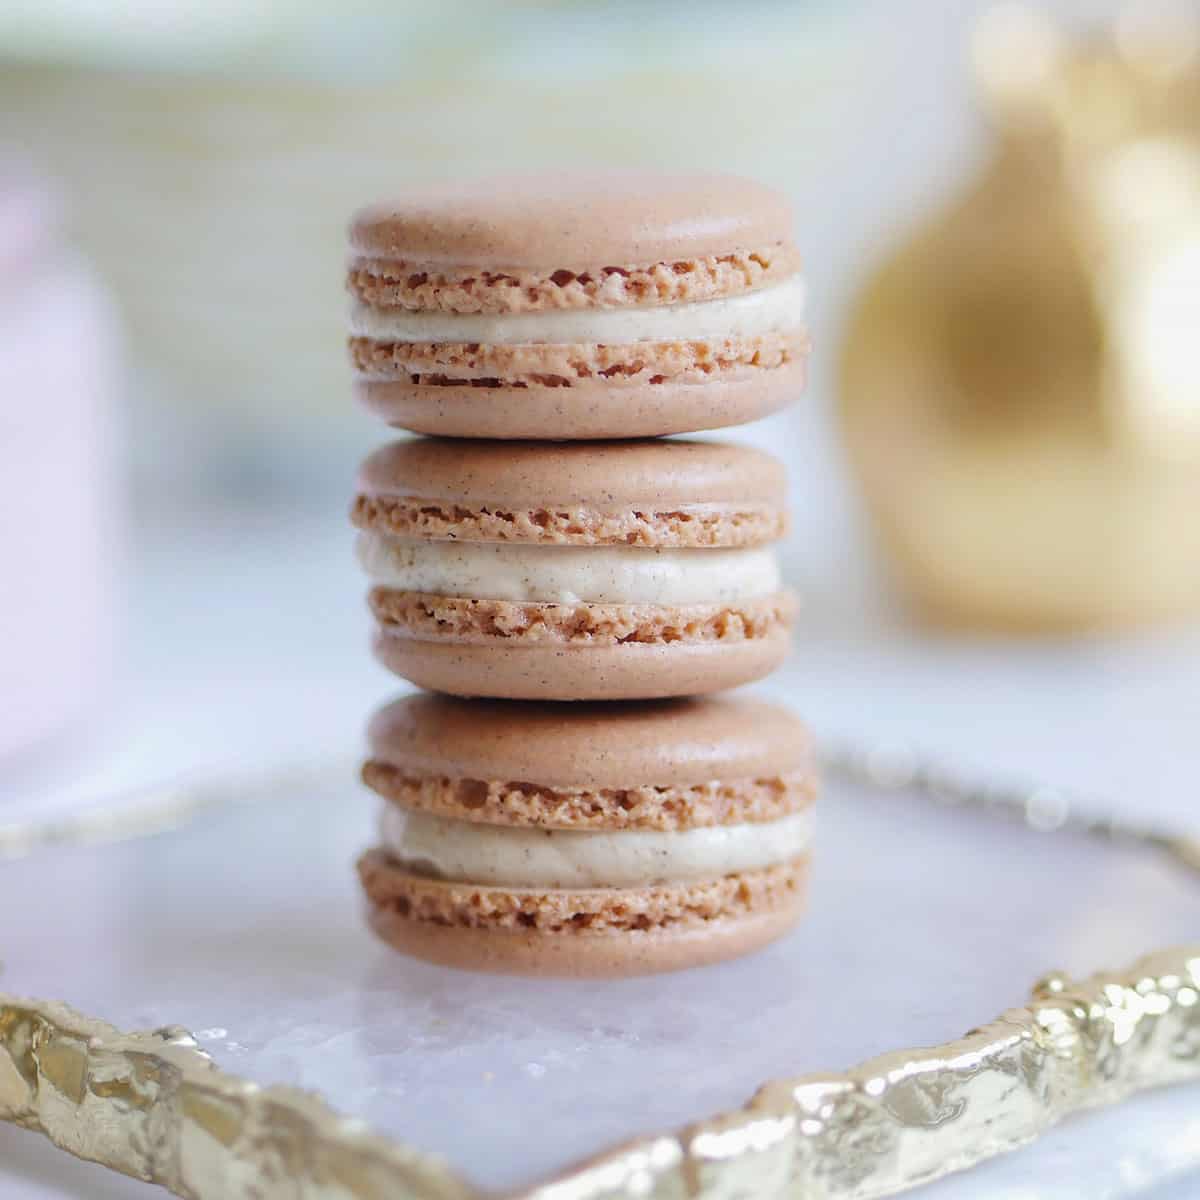 A stack of 3 gingerbread spice macarons on an agate plate.